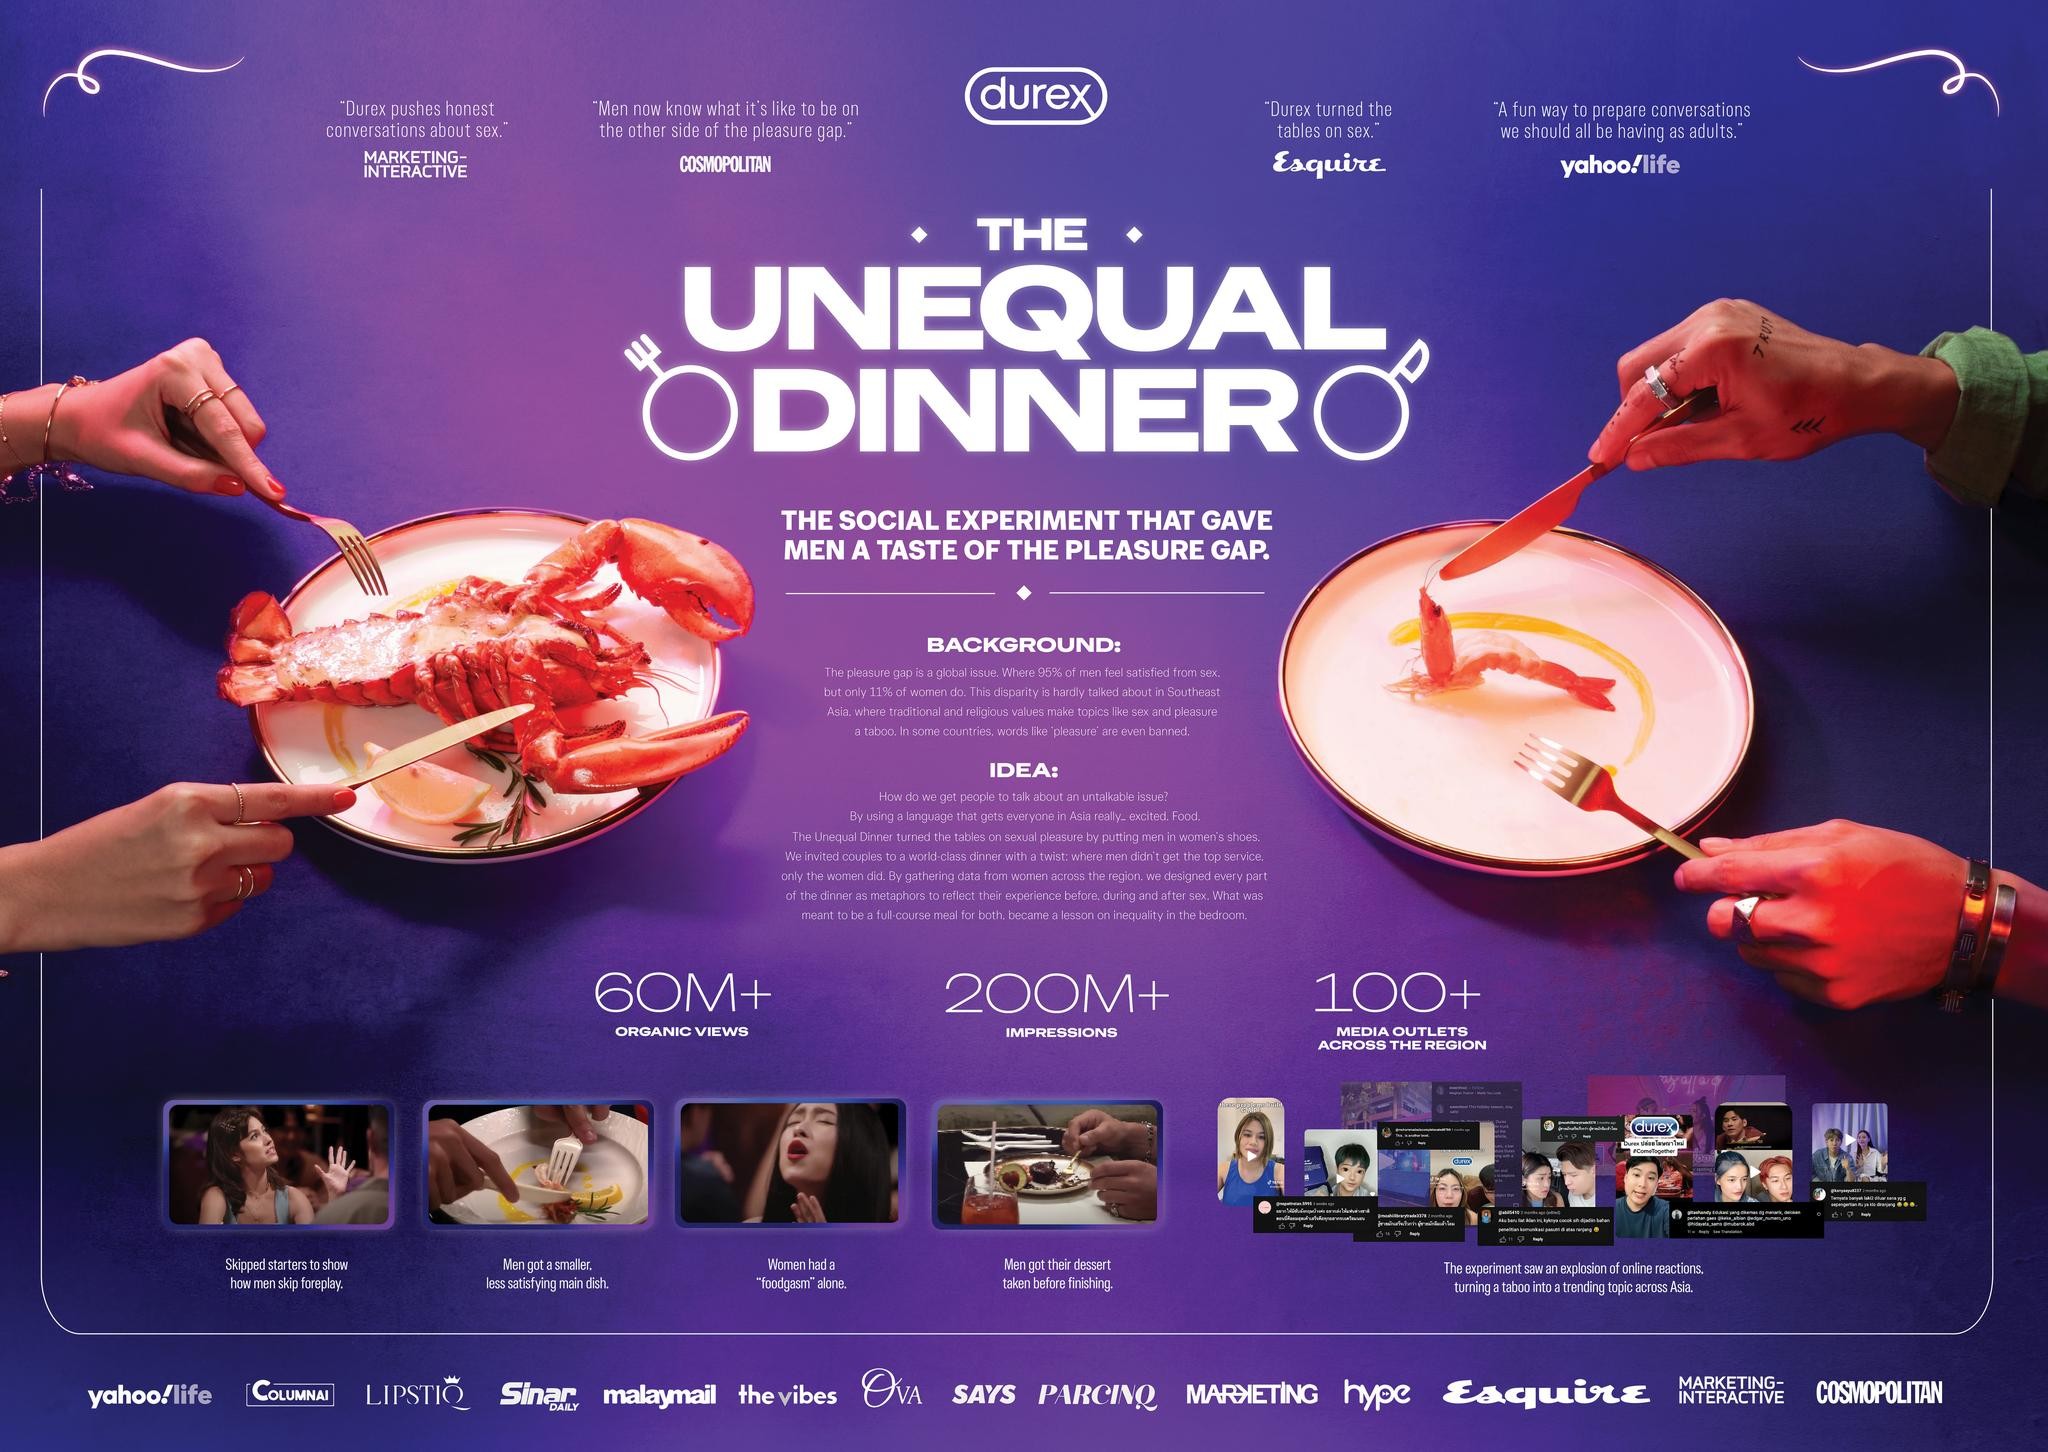 THE UNEQUAL DINNER